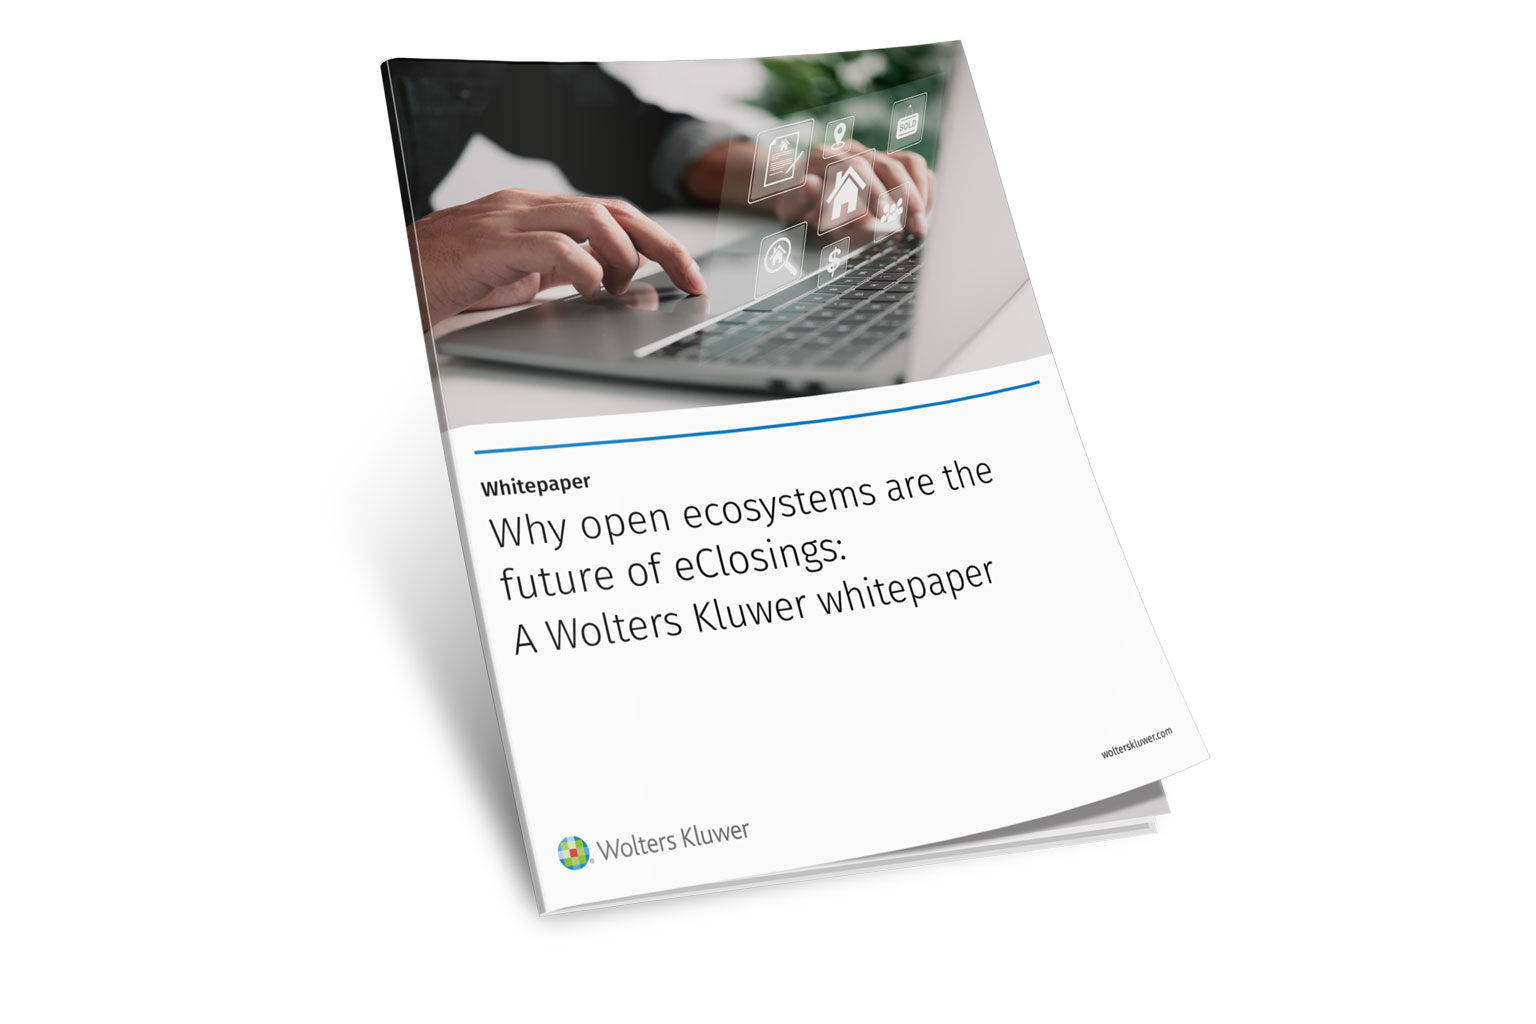 Why open ecosystems are the future of eClosings: A Wolters Kluwer whitepaper